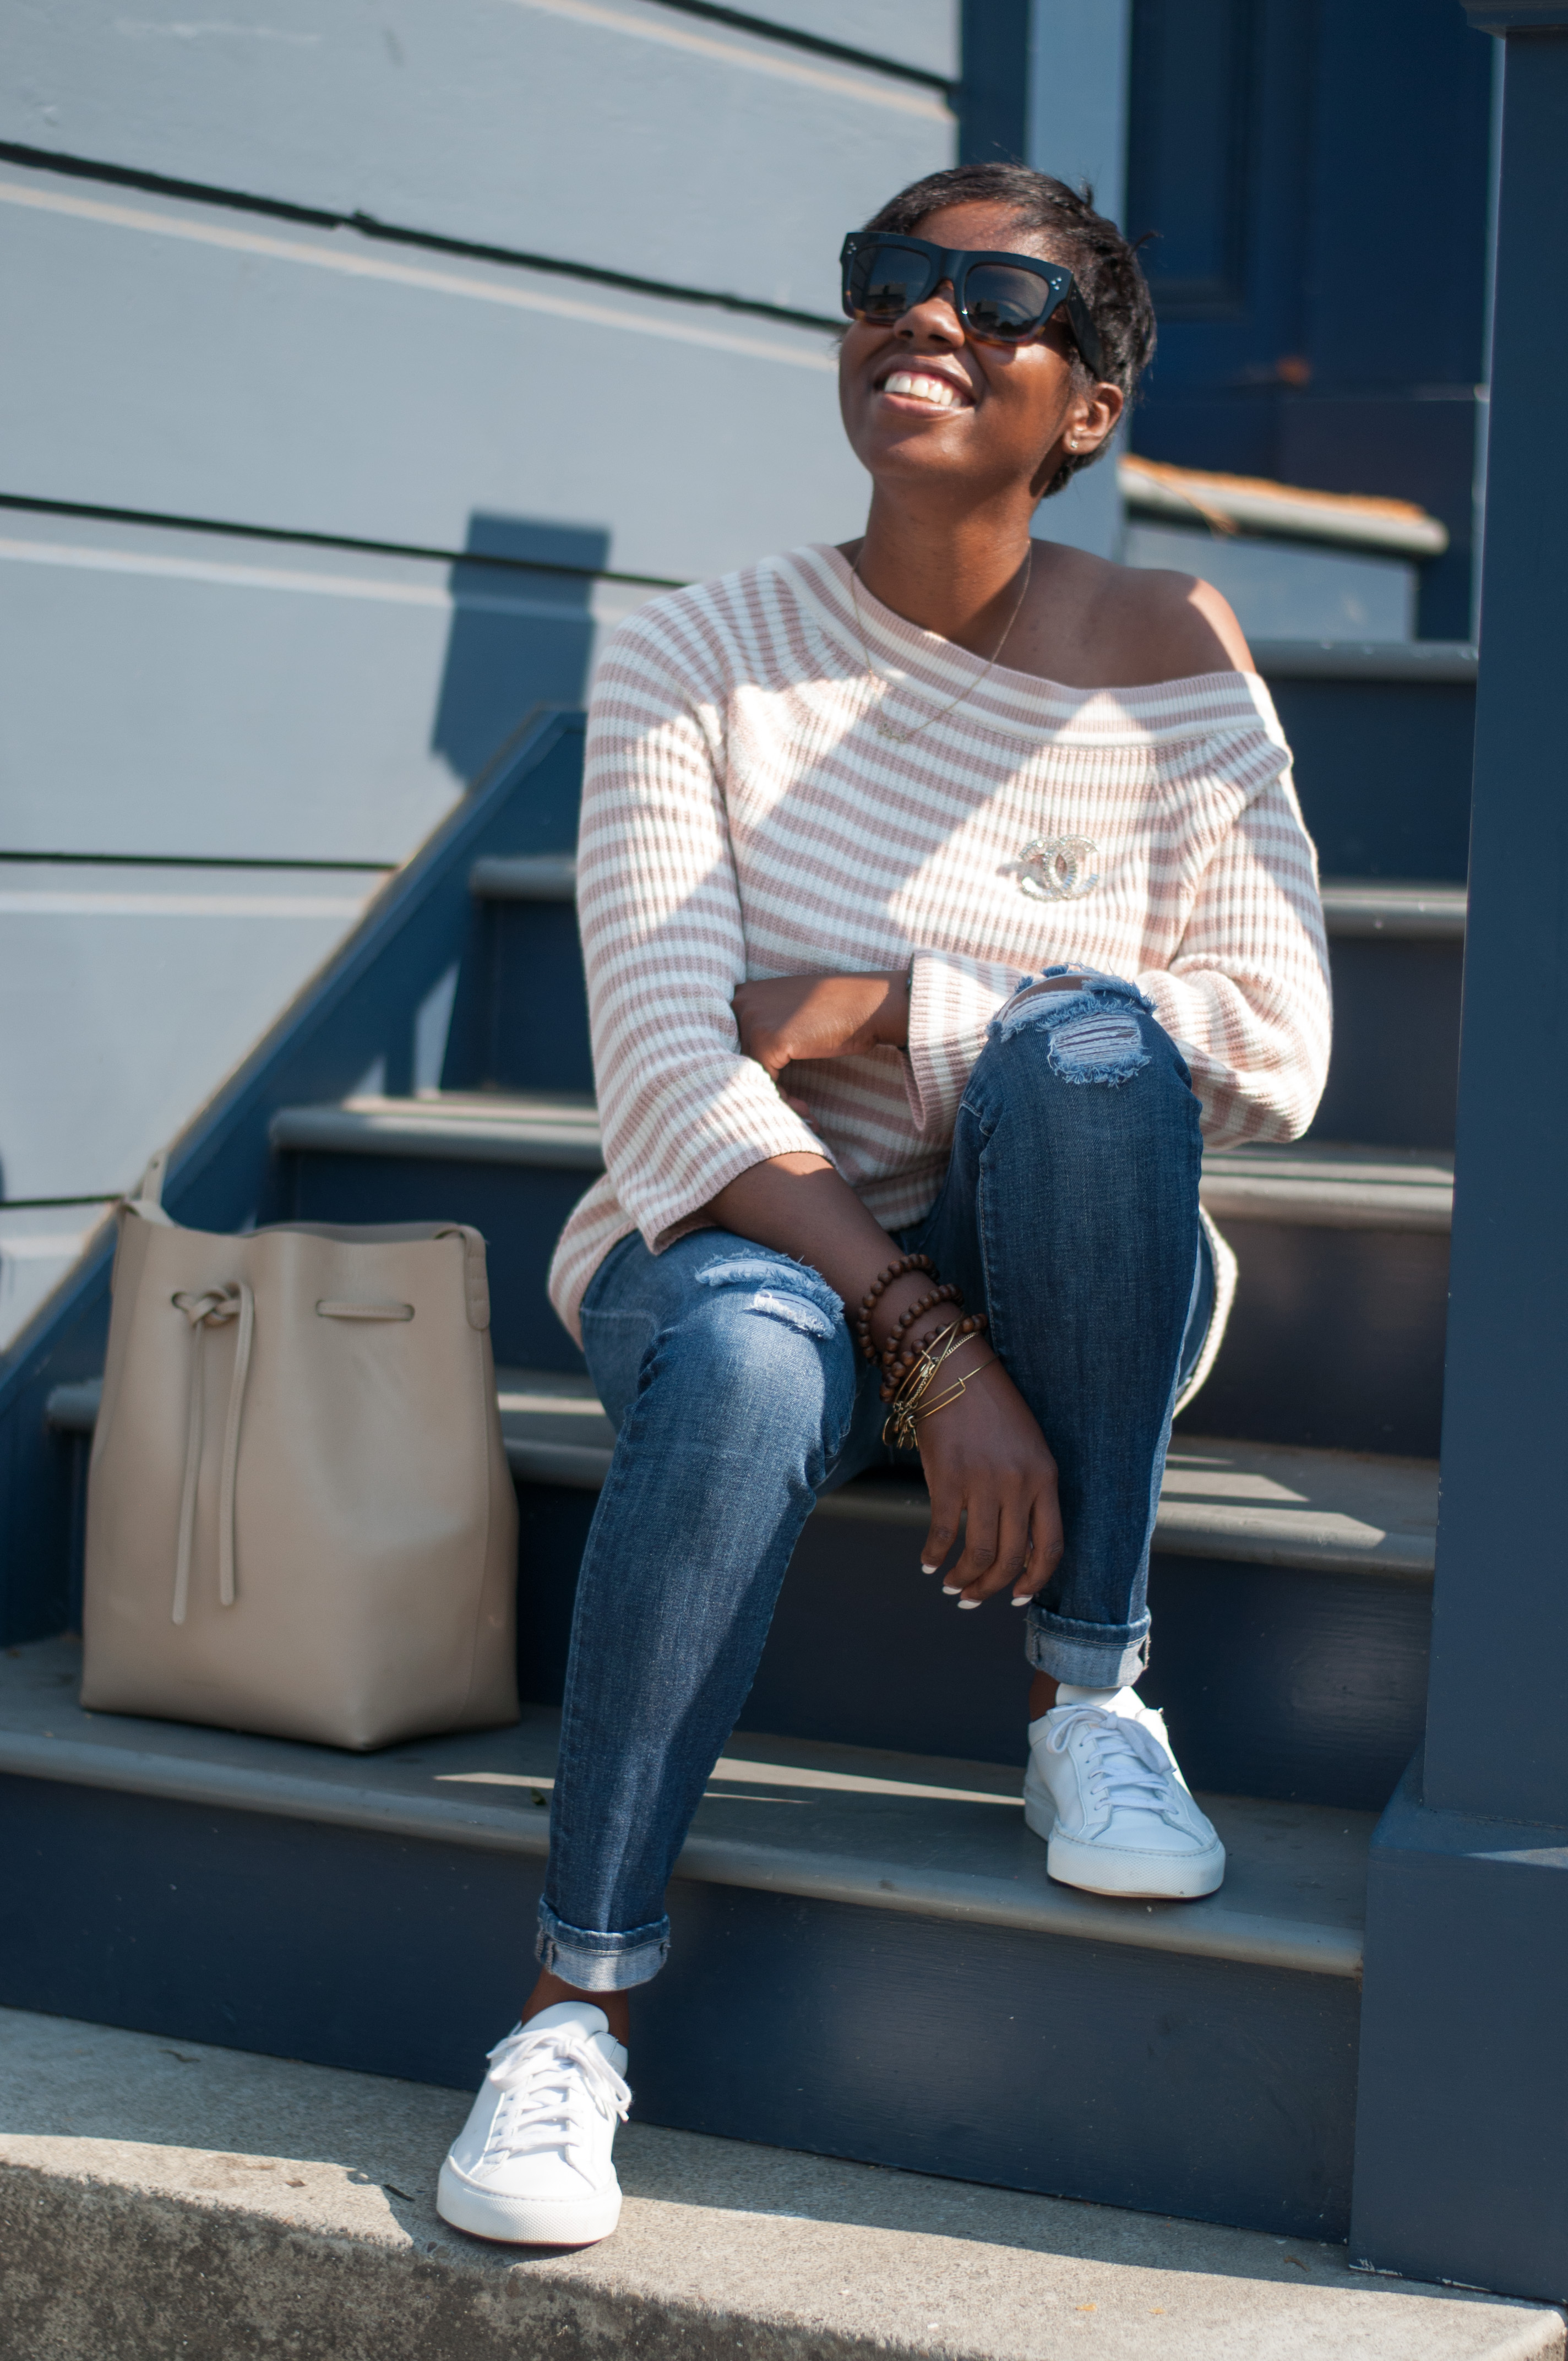 Jcrew Striped Relaxed Boatneck Sweater Dstld Distressed Jeans Common Projects White Achilles Sneakers Mansur Gavriel Sand Bucket Bag Chanel Strass Brooch Celine Sunglasses San Francisco Sf Bay Area Style Fashion Blog Blogger